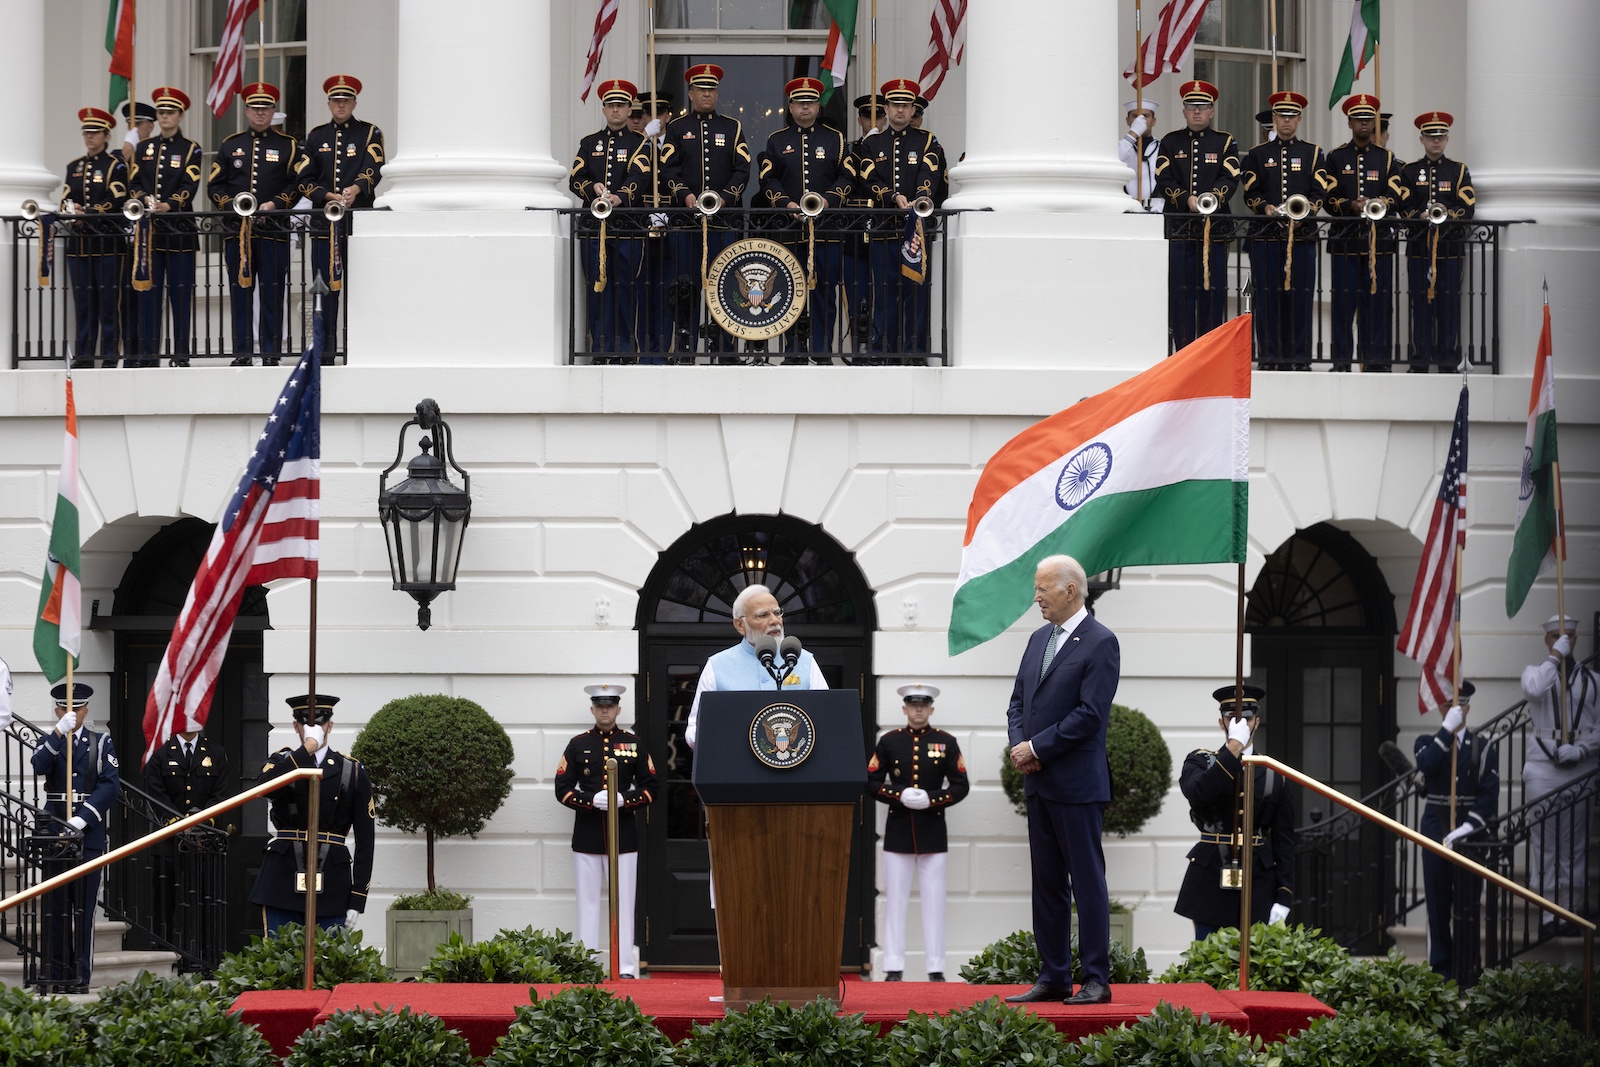 epa10706094 Prime Minister of India Narendra Modi (L) speaks beside US President Joe Biden (R) during an official welcome ceremony on the South Lawn of the White House in Washington, DC, USA, 22 June 2023. Biden hosts Modi for a state visit, during which they will discuss a variety of issues ranging from security in the Indo-Pacific, technology partnership and climate change.  EPA/MICHAEL REYNOLDS